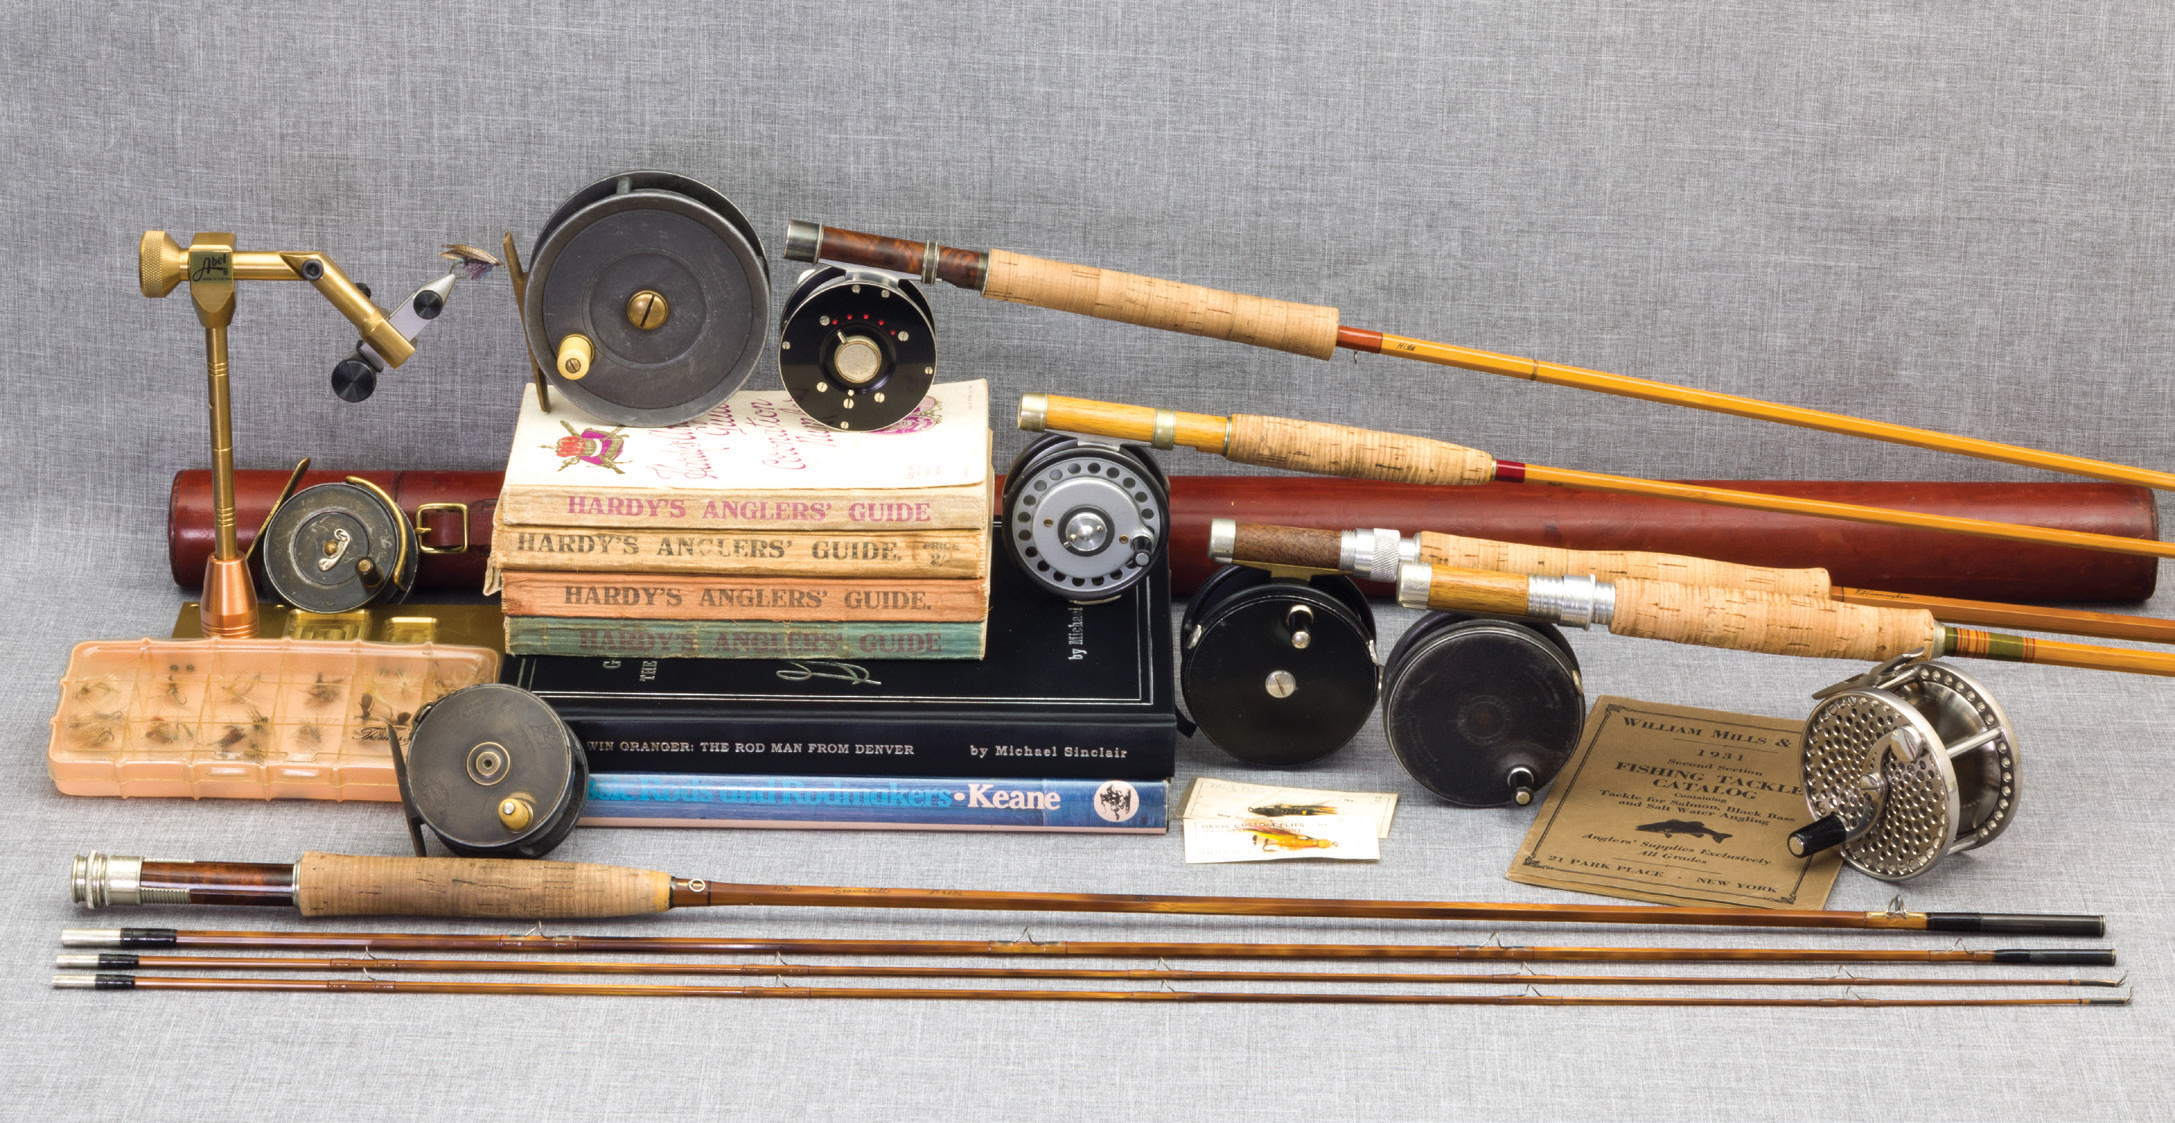 Vintage Fly Fishing Rod